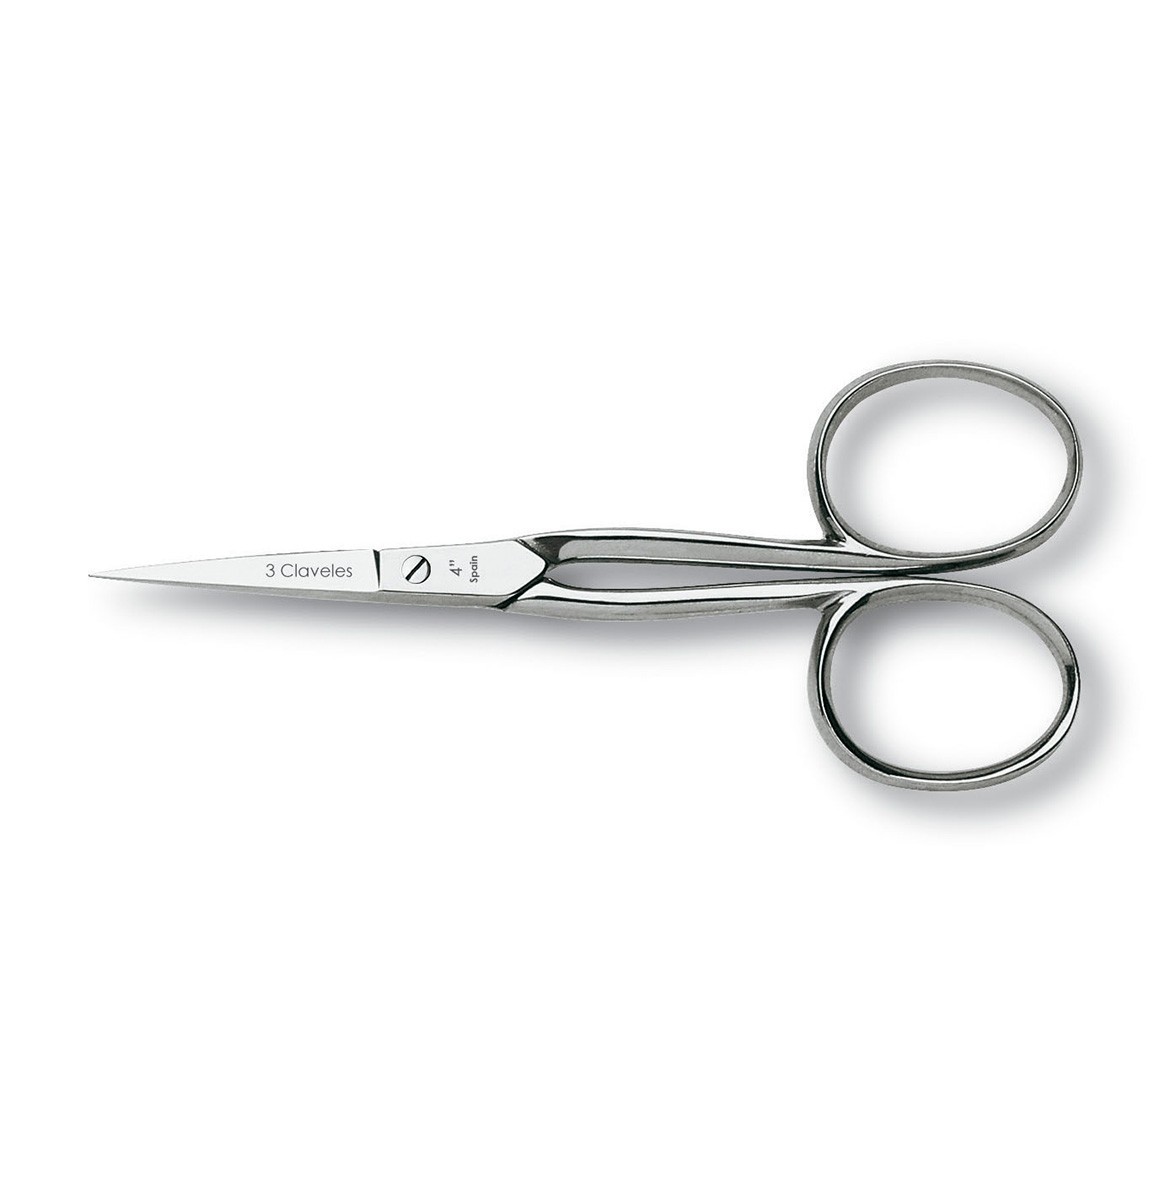 Buy EMBROIDERY SCISSORS CURVED 3.5 3 CLAVELES 0056